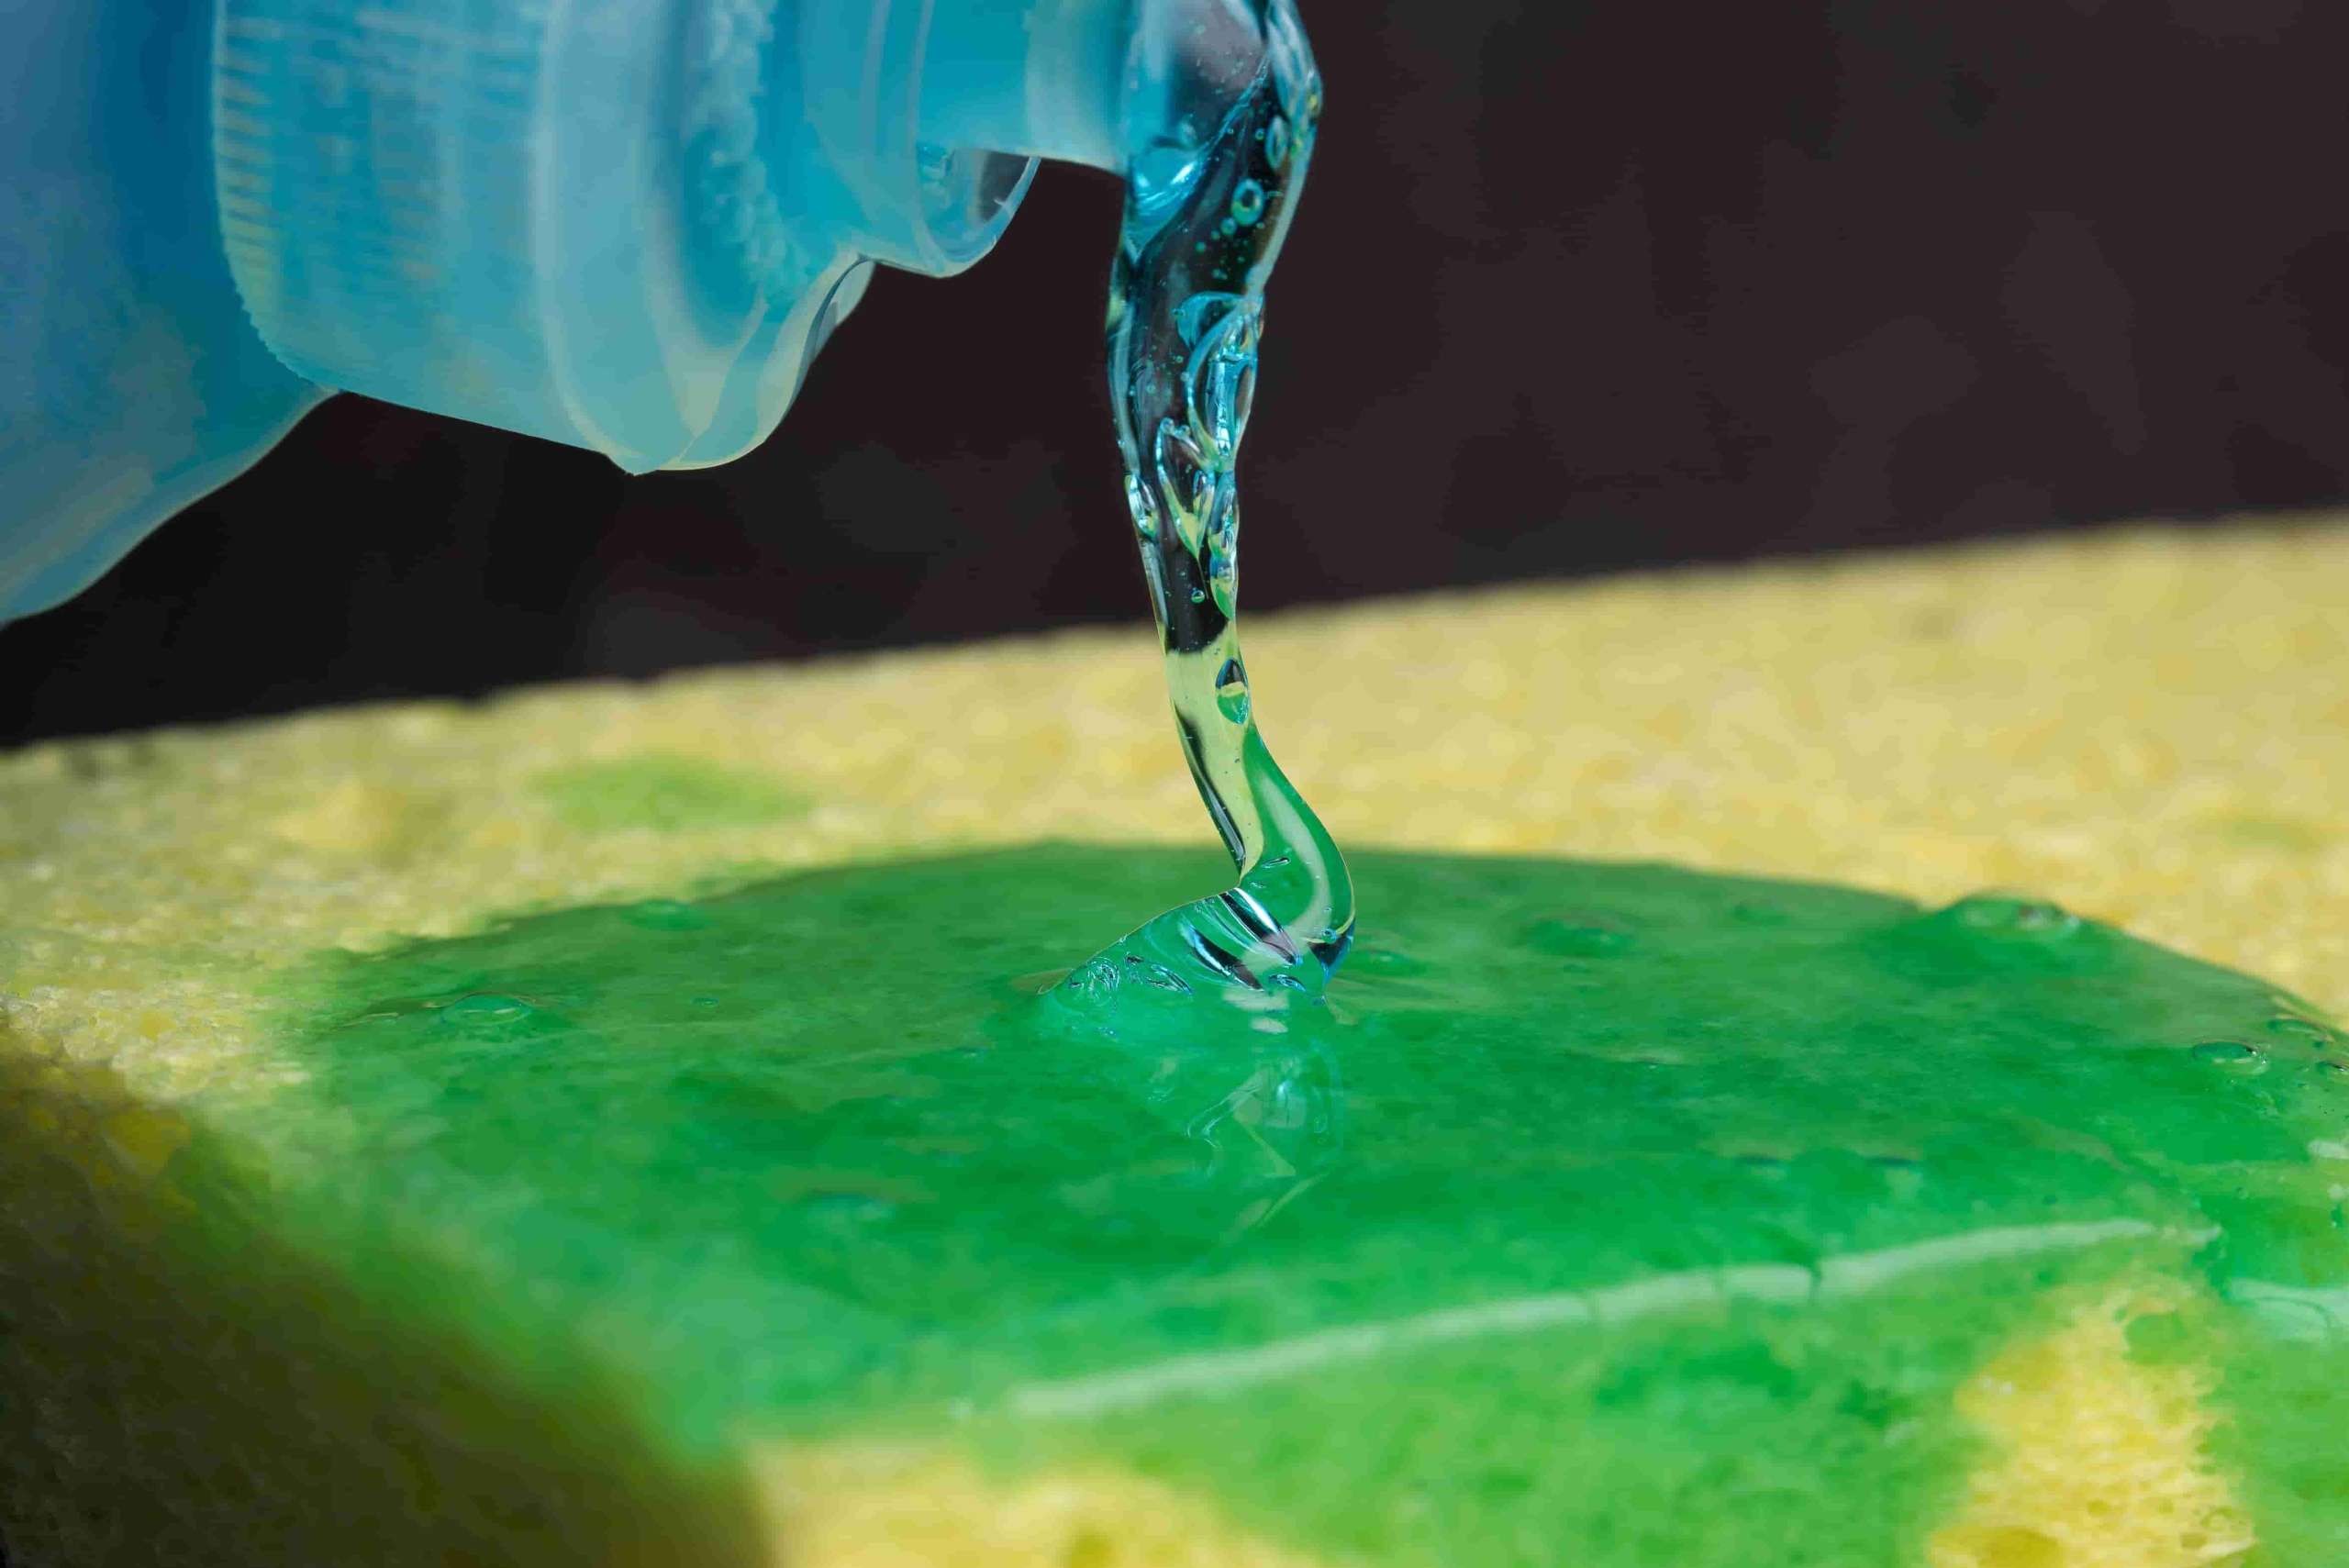 close up of dishwashing liquid being spread on cleaning sponge 750557307 5aeb6518c06471003646aefd 3 1 1 scaled